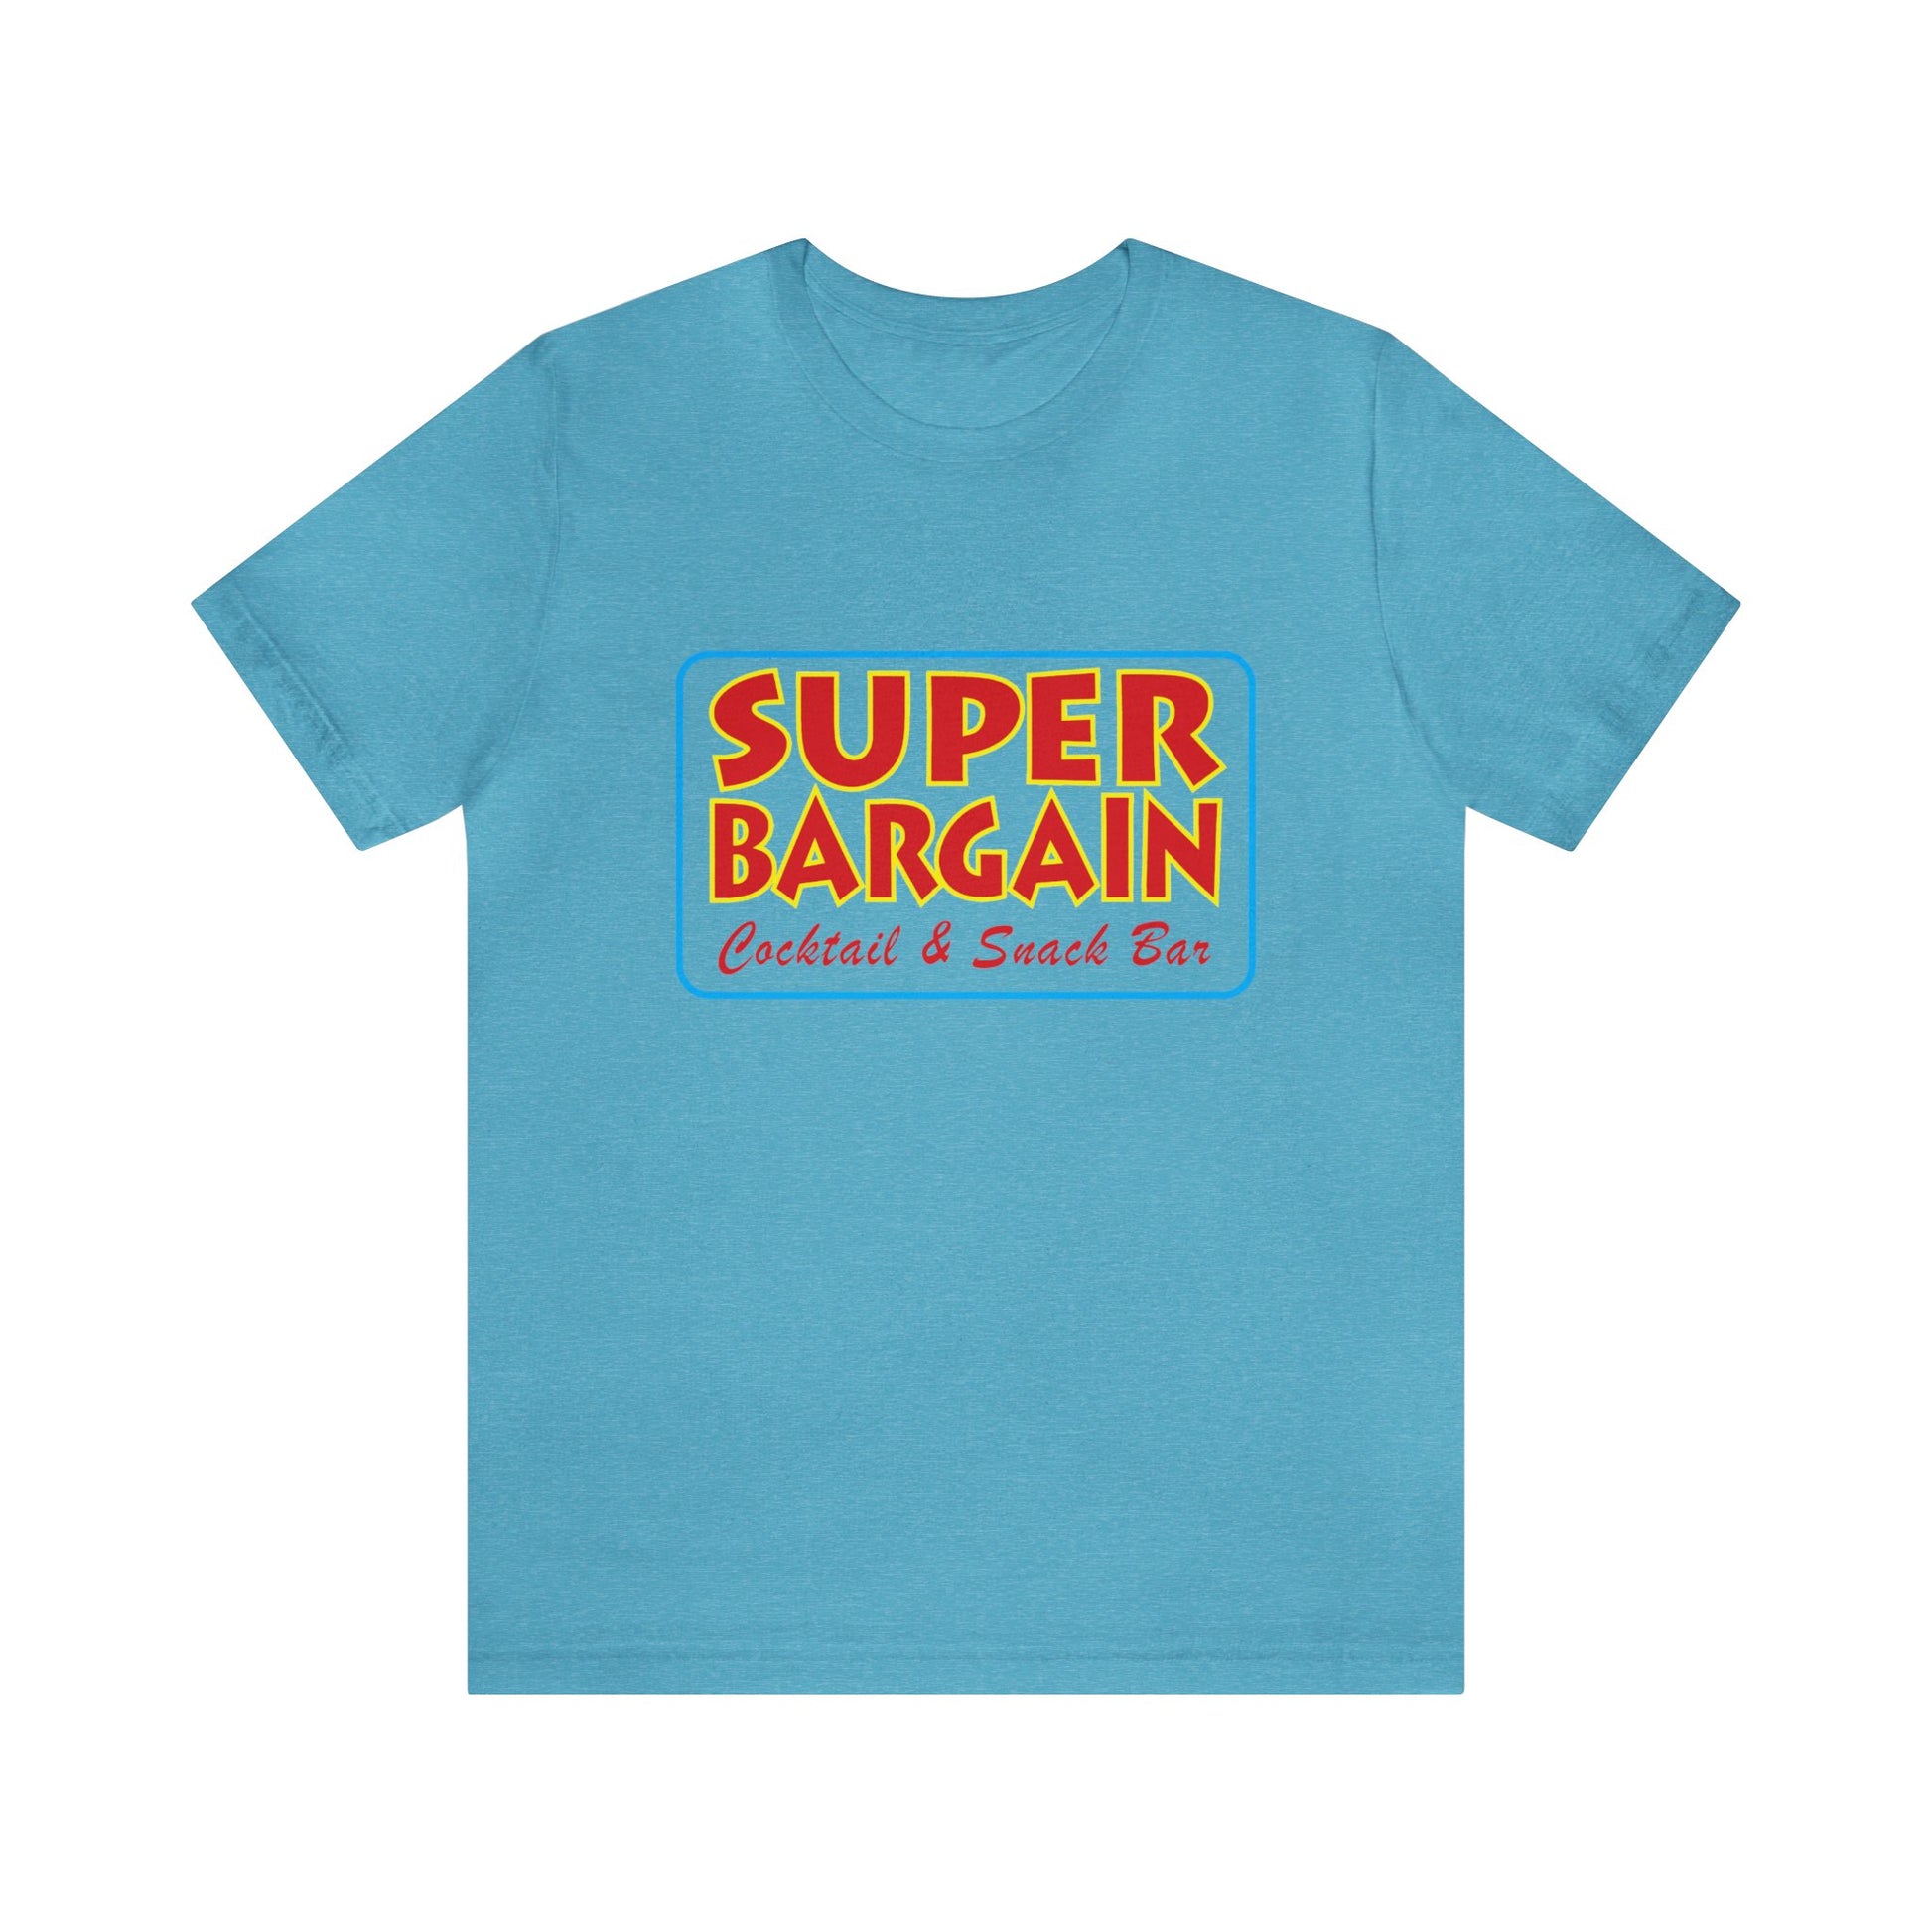 Light blue Unisex Jersey Short Sleeve Tee with "SUPER BARGAIN Cocktail & Snack Bar - Cabbagetown, Toronto" printed in red and yellow block letters on the front.